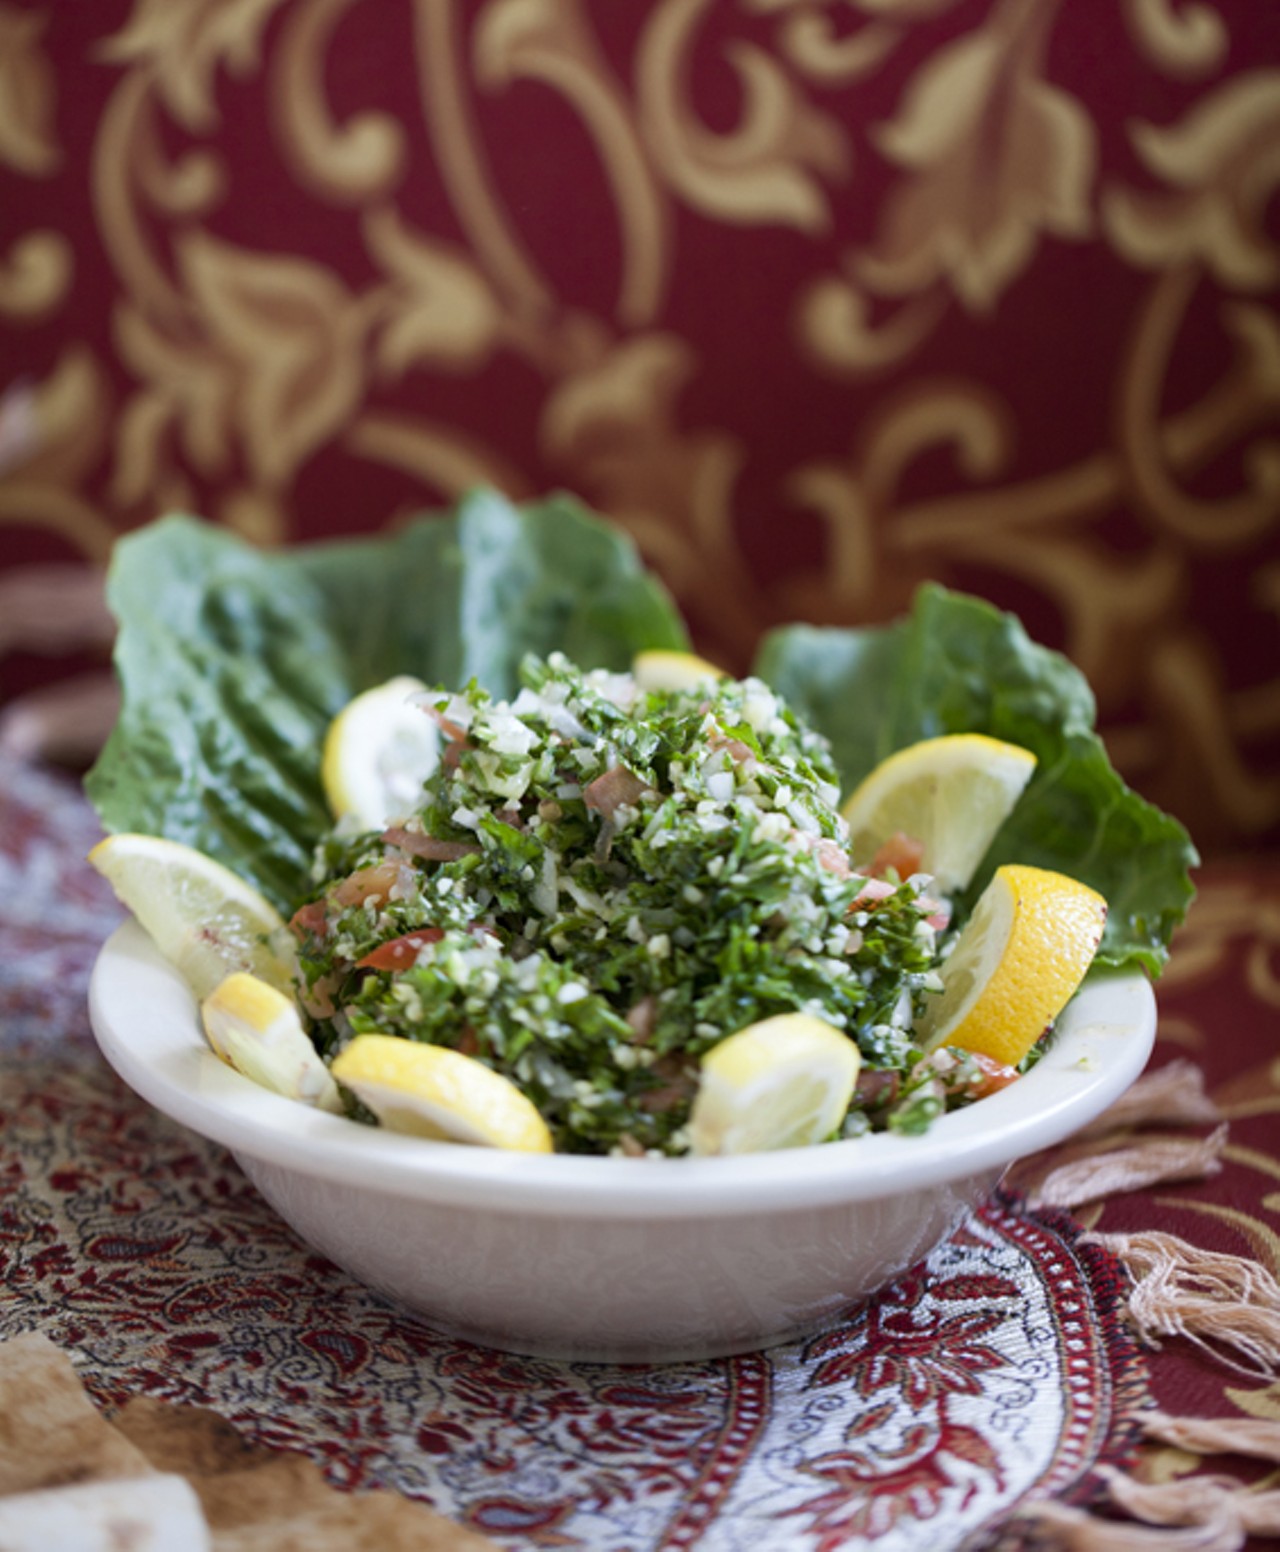 Tabouleh - a fusion of fresh parsley, tomatoes and burghul tossed lemon juice and olive oil.